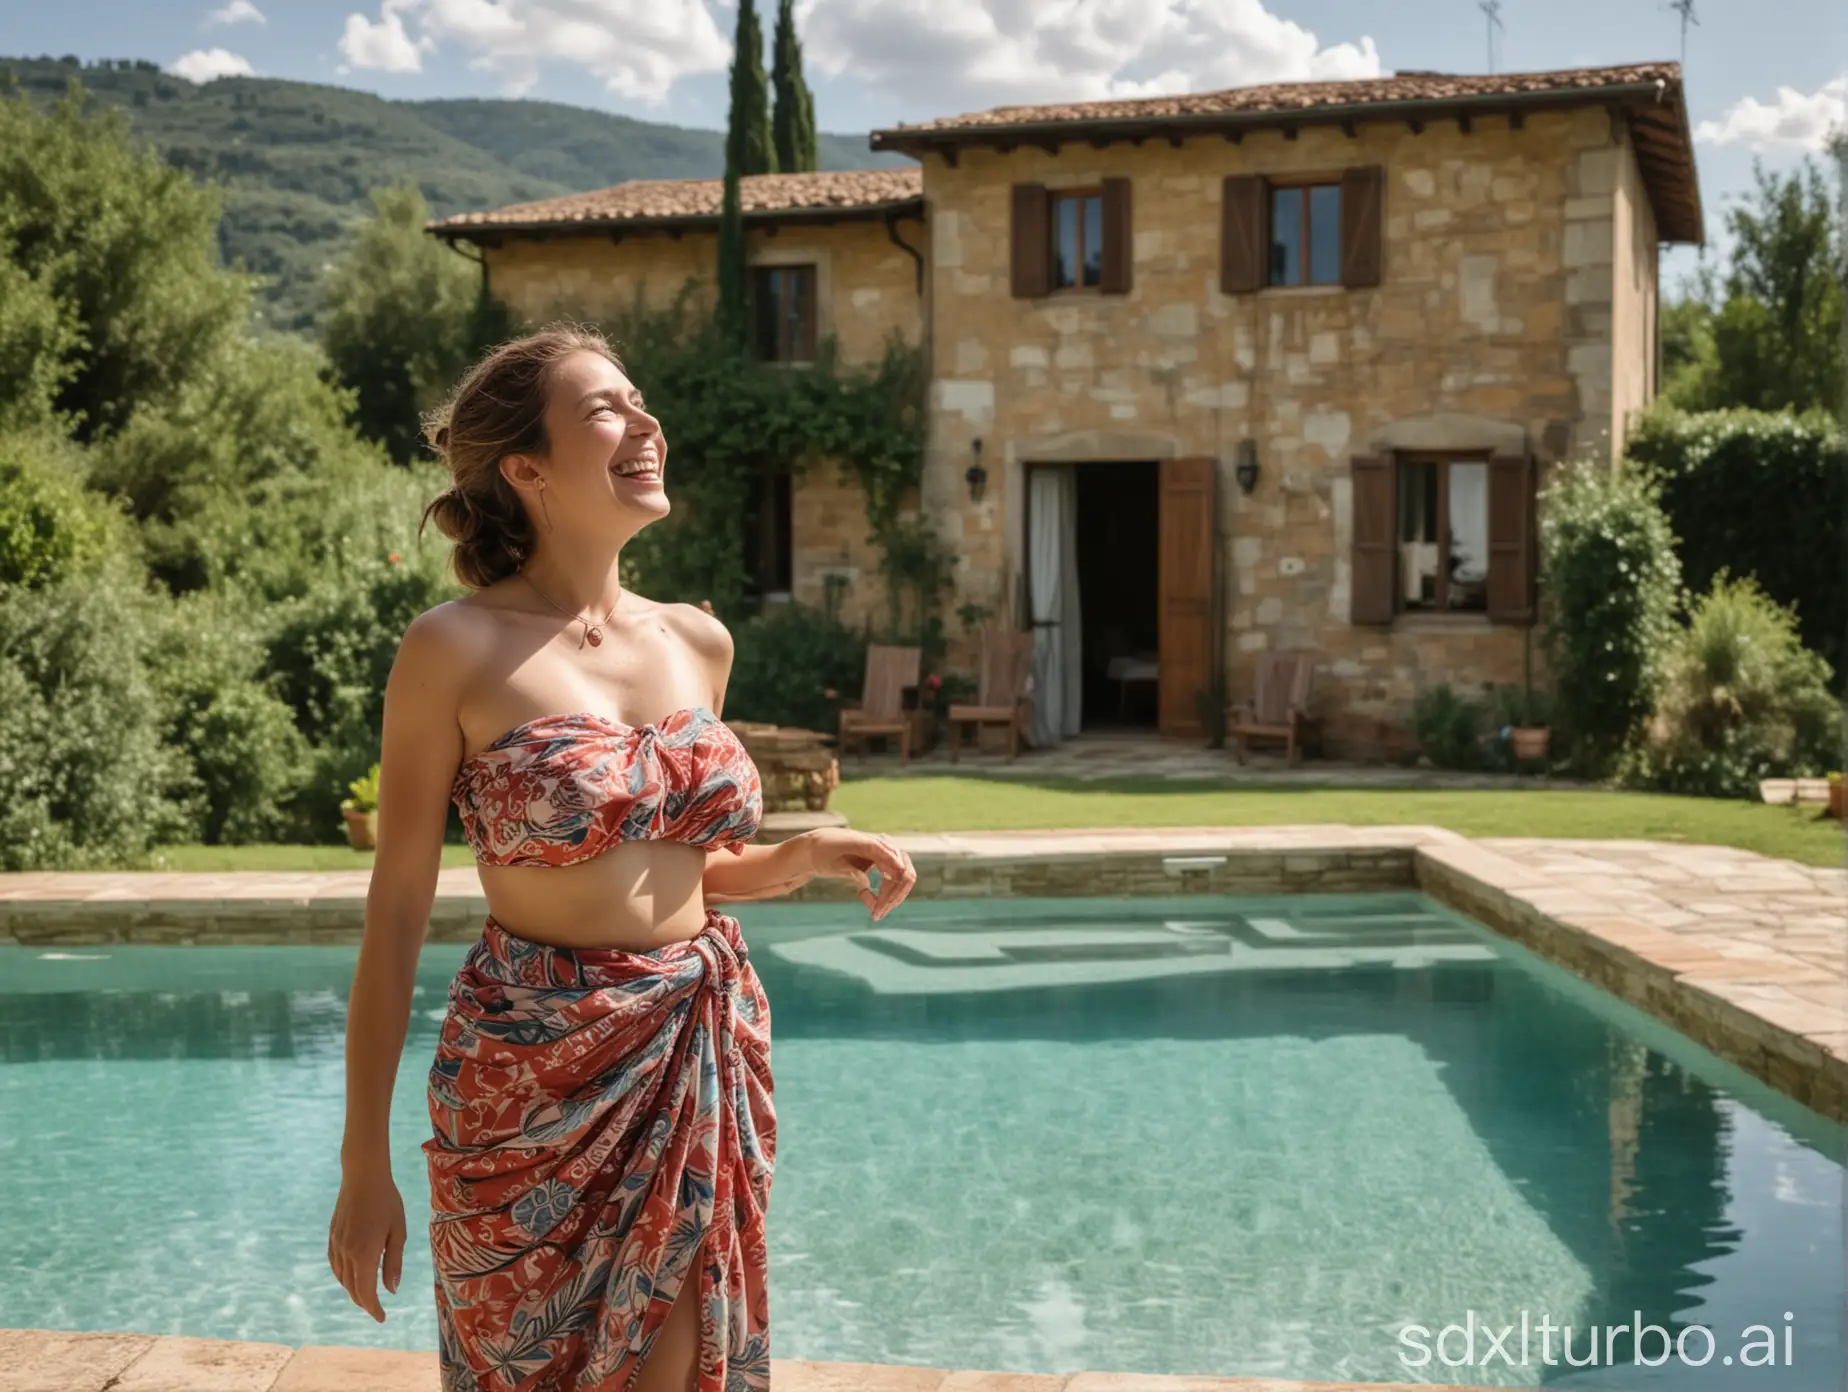 A woman in a sarong. She stands by a pool in Tuscany. She laughs. A house is in the background.